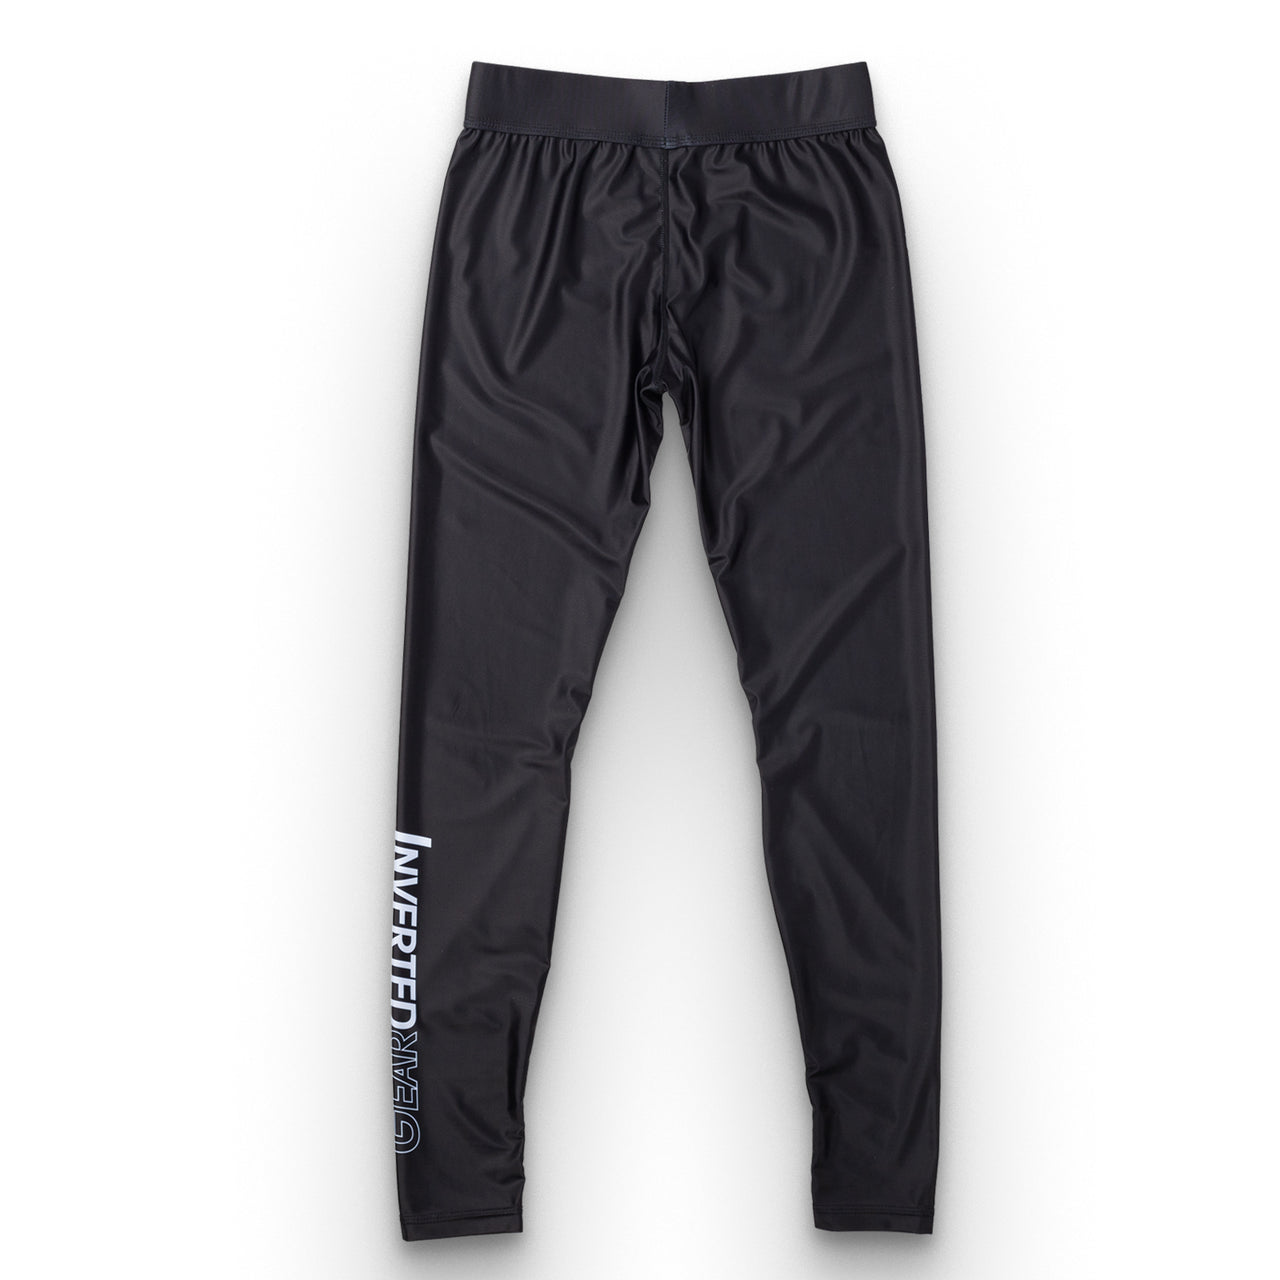 Inverted Gear Spats - Black